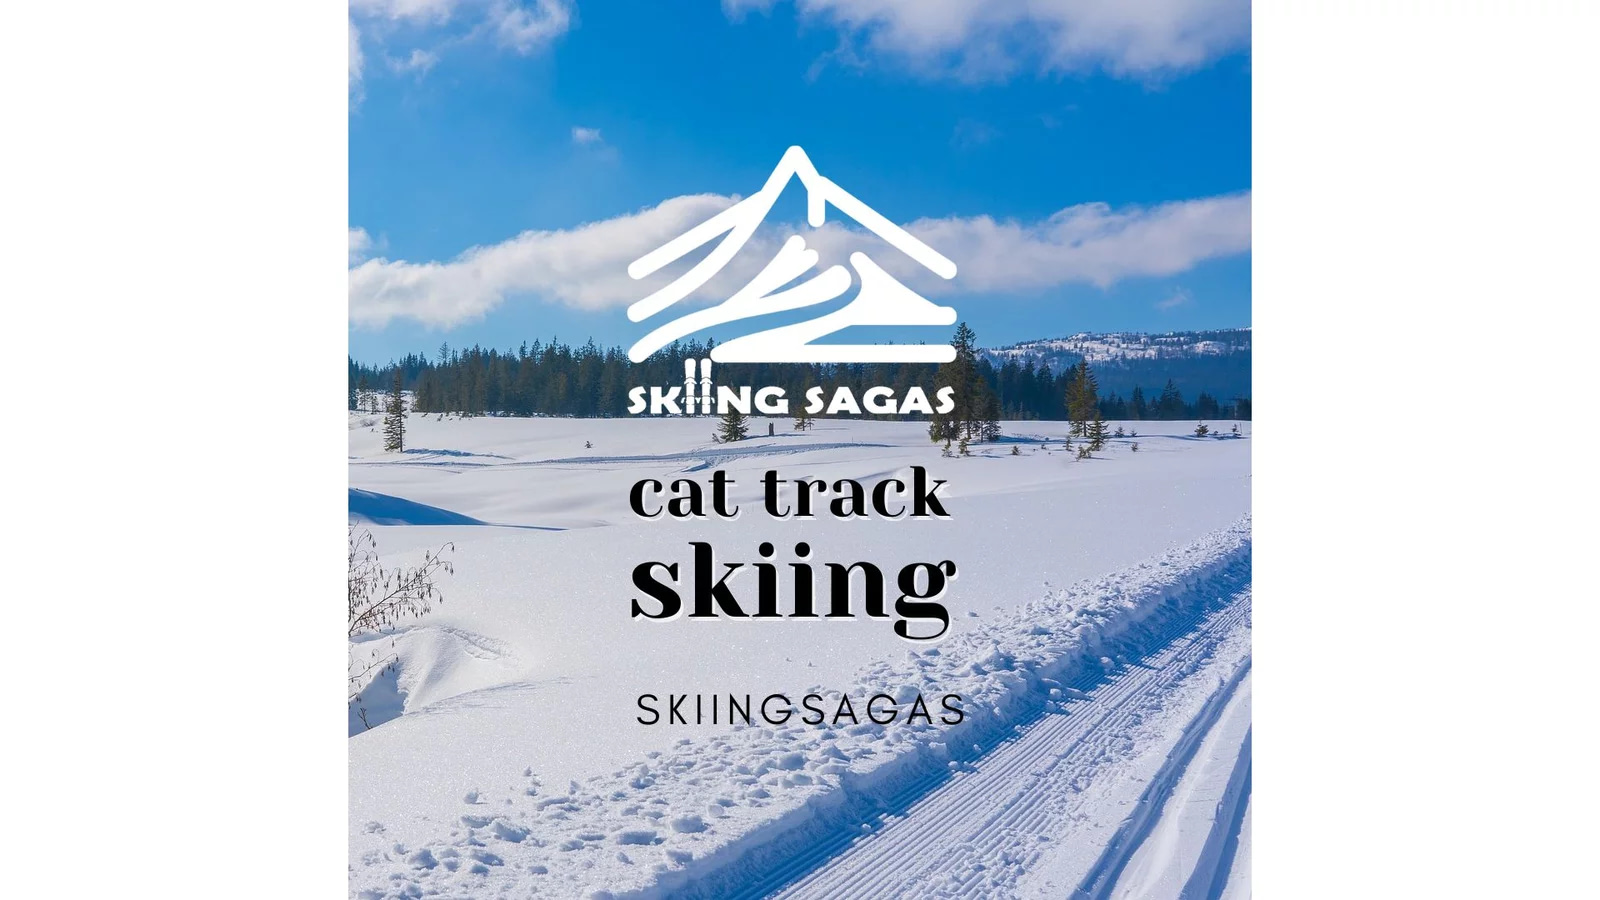 cat track skiing featured